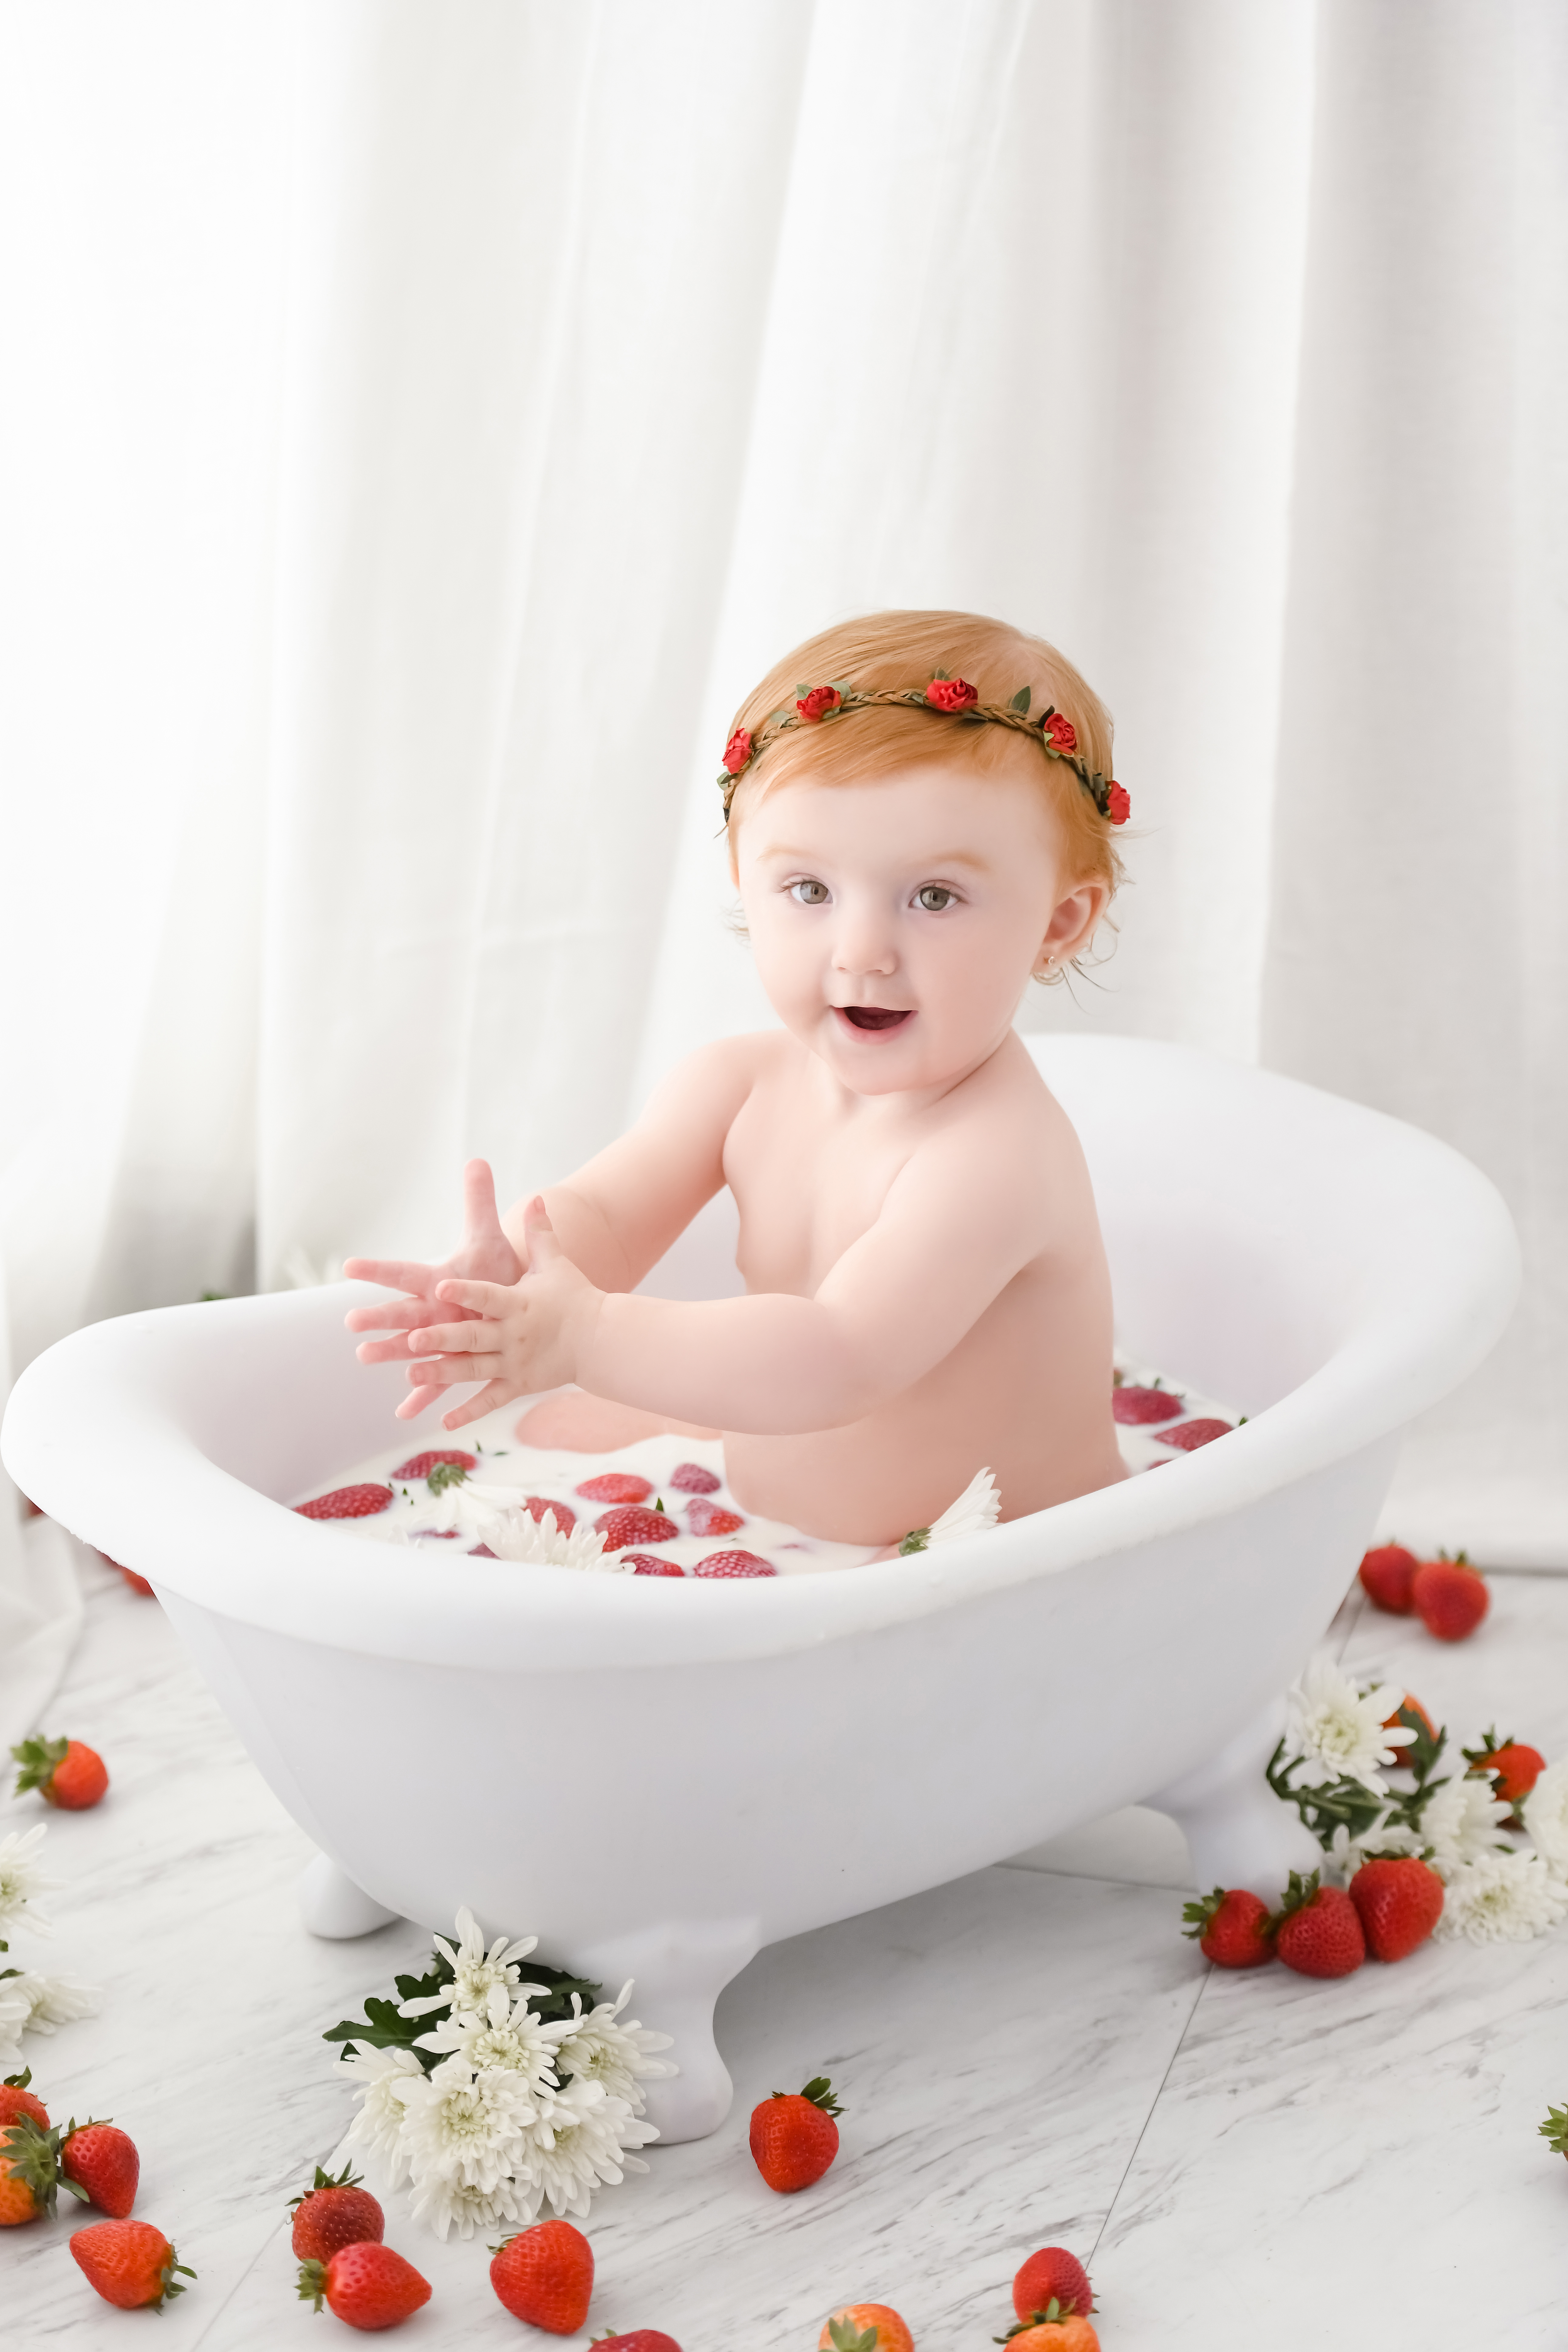 West LA Baby Photographer  Splash Sessions on Mini Bathtub Set! - Los  Angeles based photo studio, The Pod Photography, specializing in maternity,  newborn, baby, first birthday cake smash and family pictures.